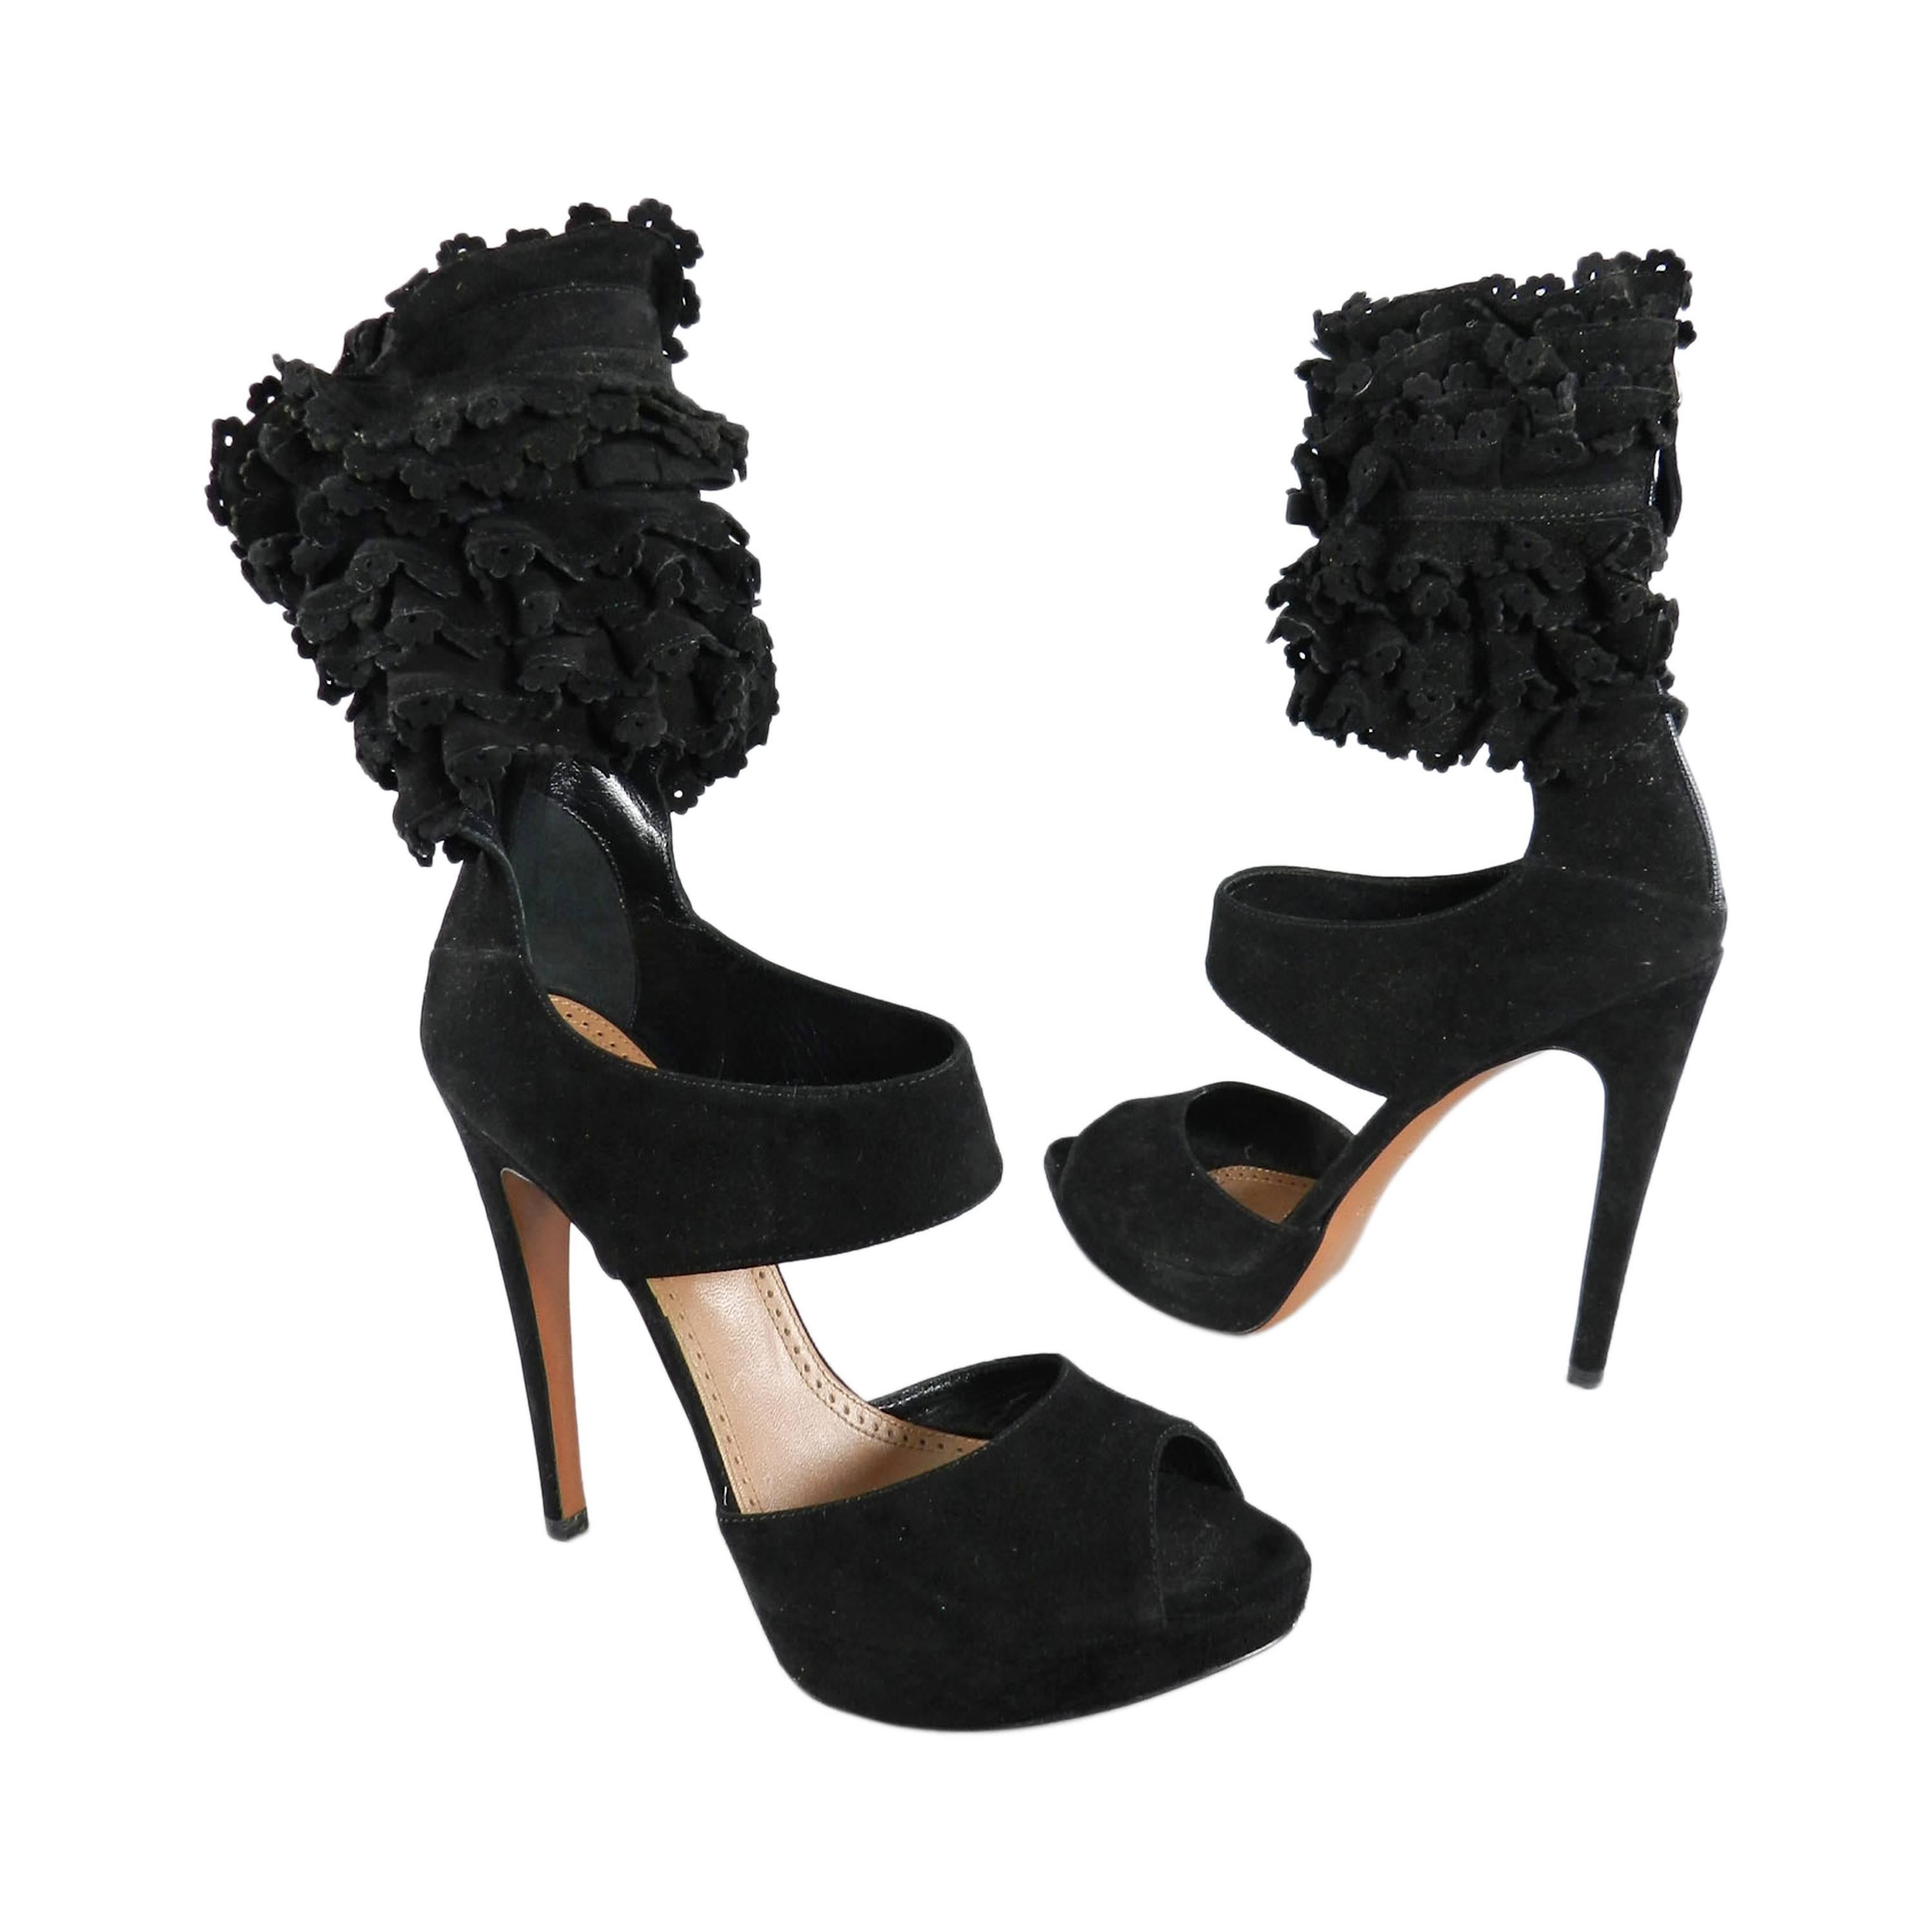 Alaia Black Suede Ruffle Ankle Heels - size 41